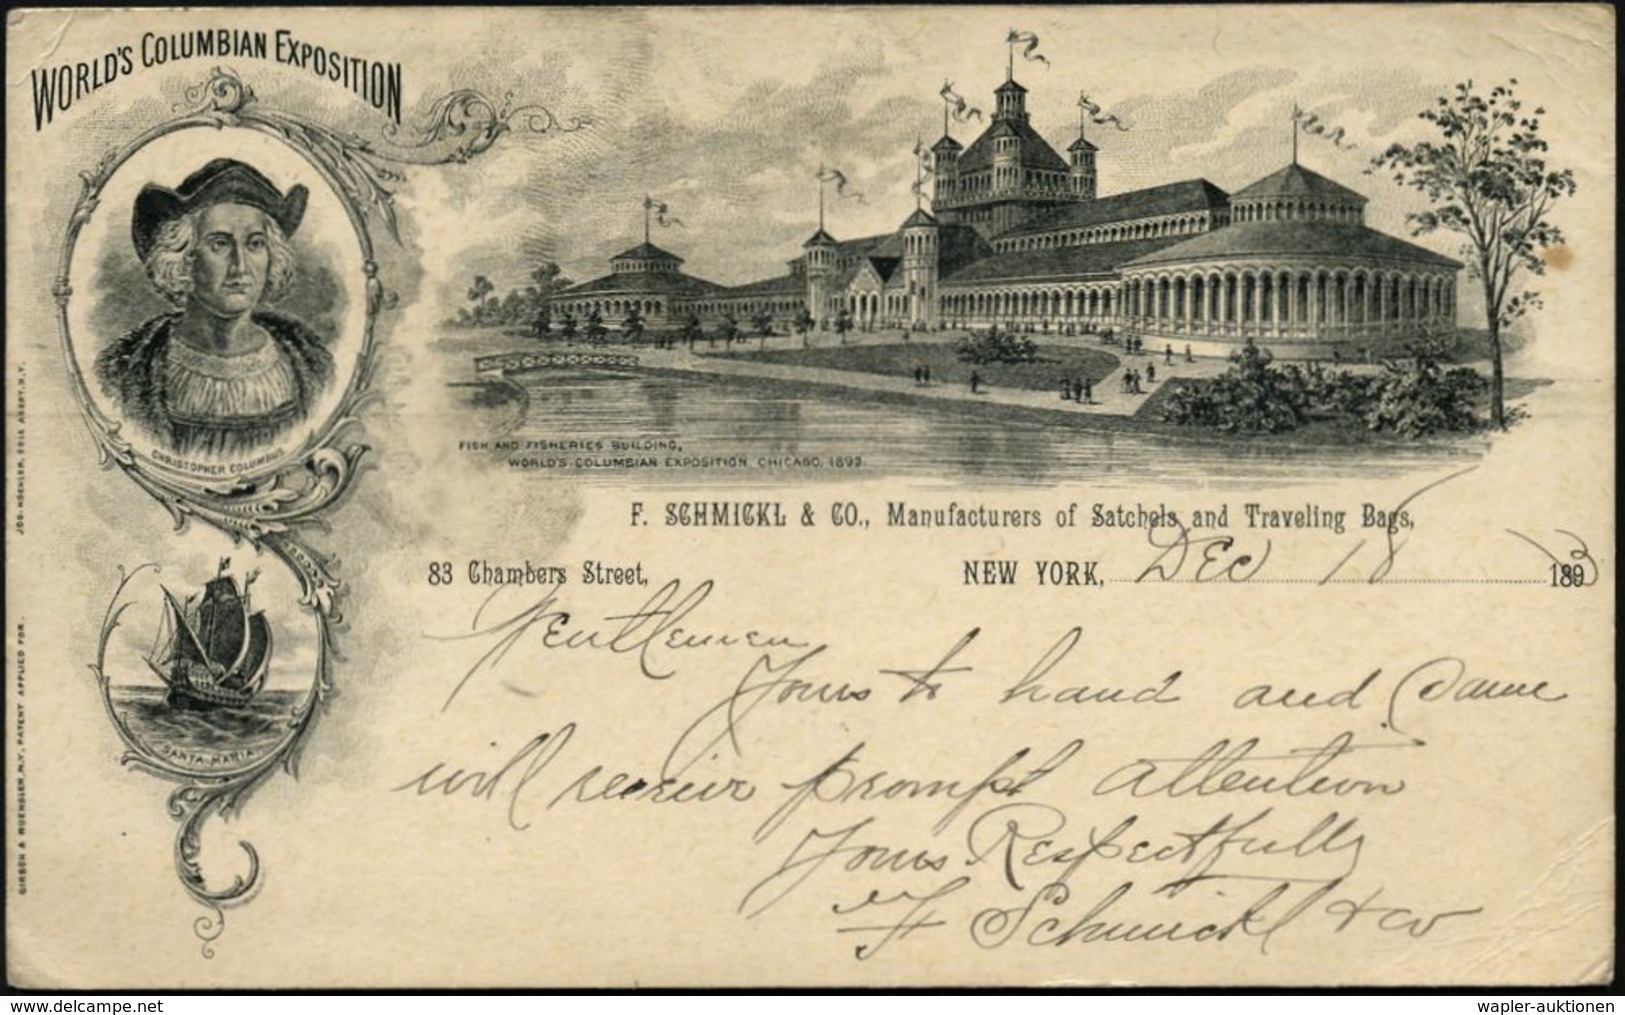 U.S.A. 1893 (18.12.) PP 1 C. Grant, Schw.: WORLD'S COLUMBIAN EXPOSITION, FISH AND FISHERIES BUILDING.. = Chr.Columbus Br - Christophe Colomb